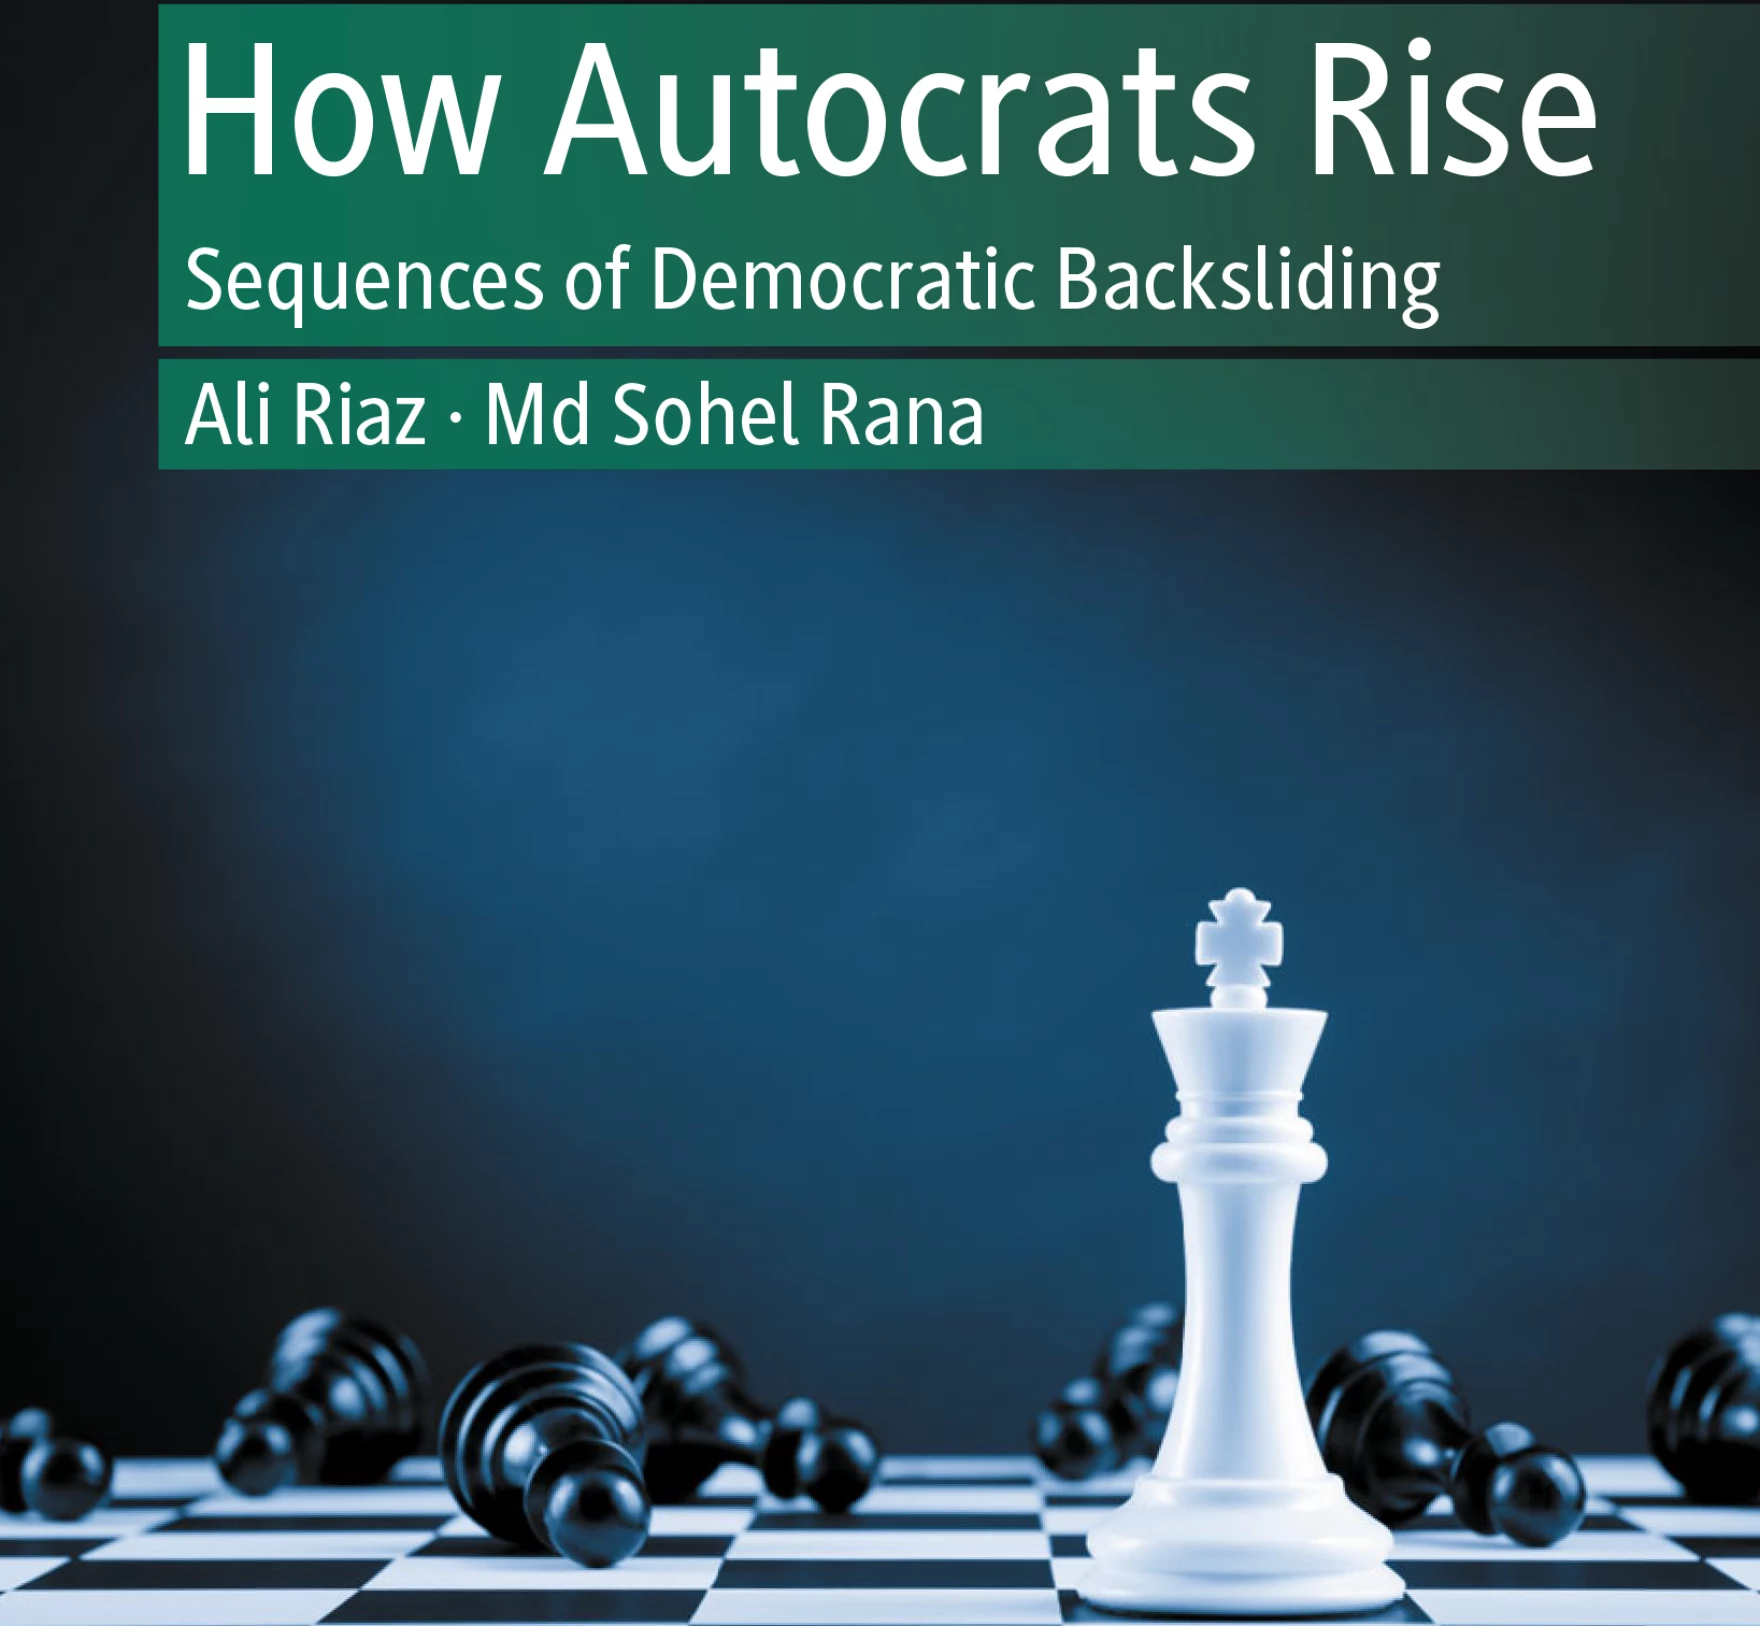 ISU scholar lays out how autocrats steal democracy in new book